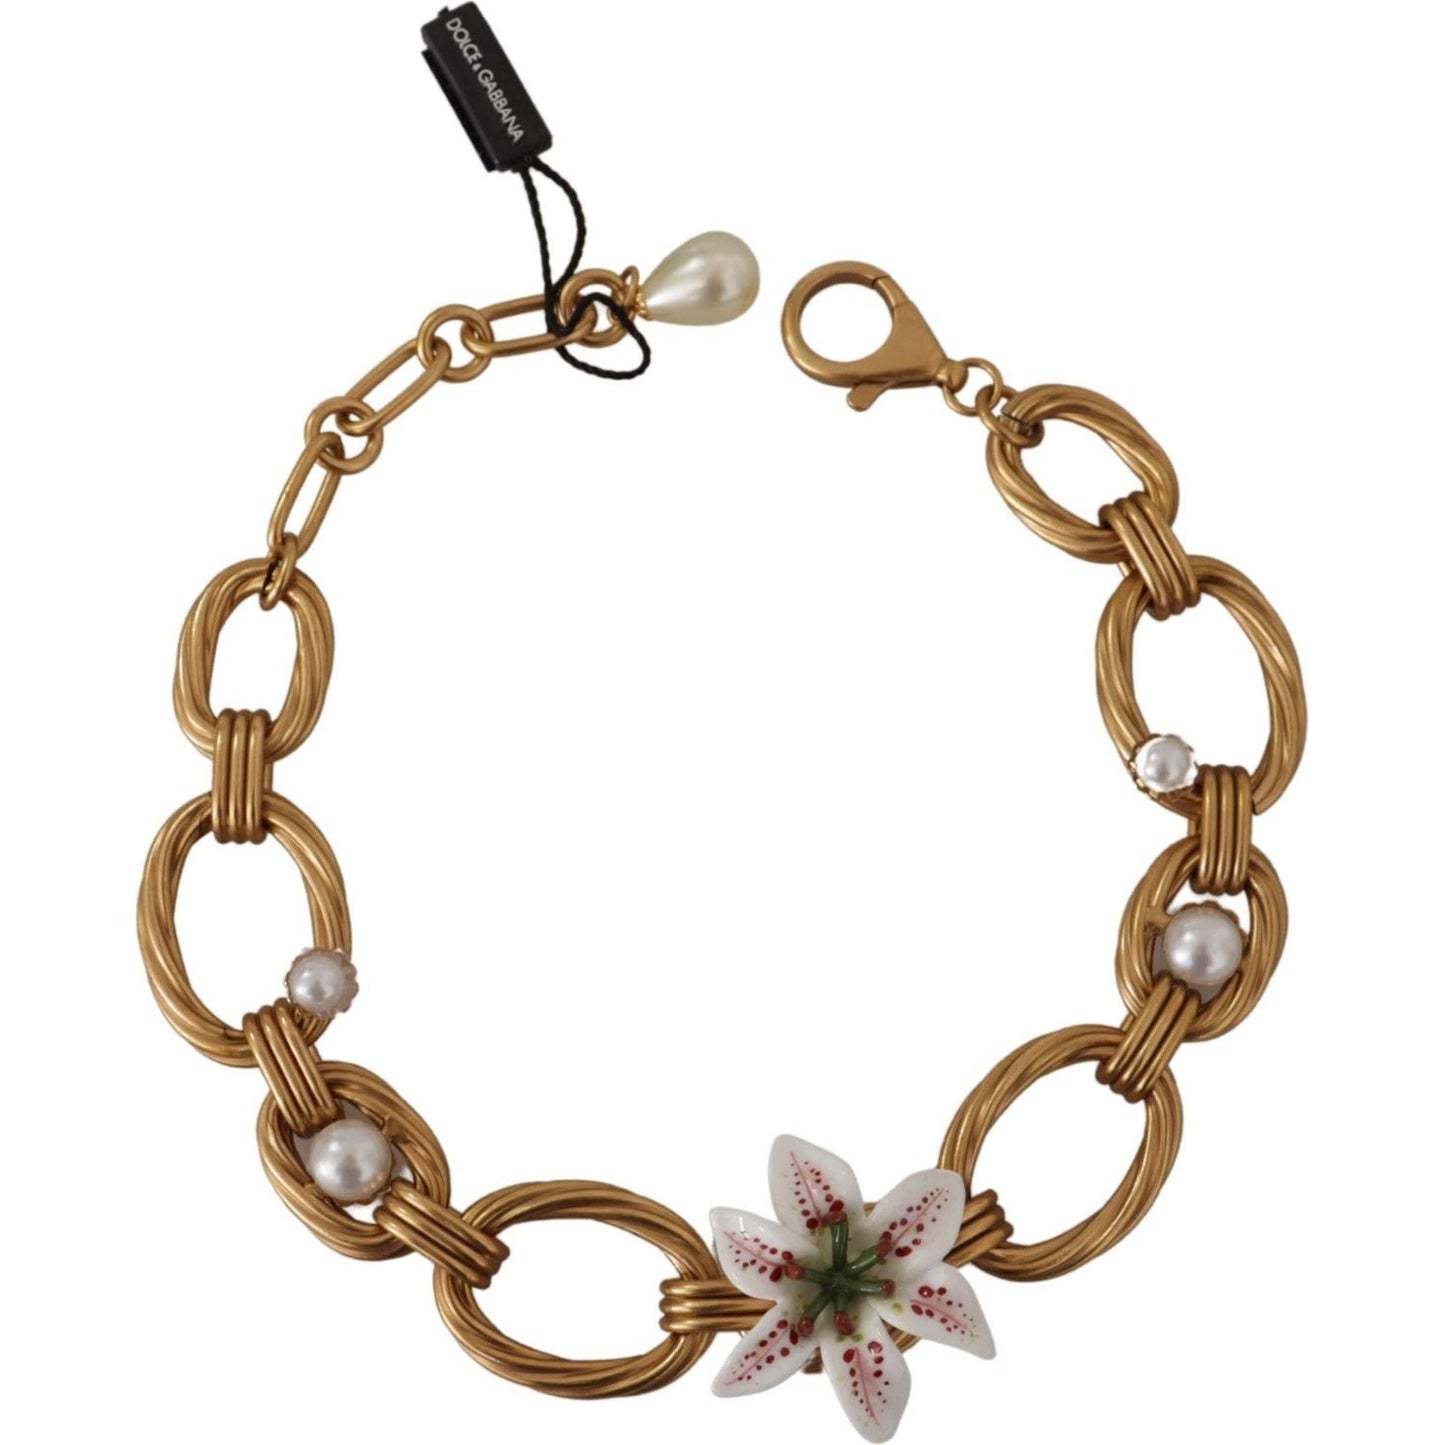 Dolce & Gabbana Elegant Gold Lilly Flower Pendant Necklace WOMAN NECKLACE gold-white-lily-floral-chain-statement-necklace